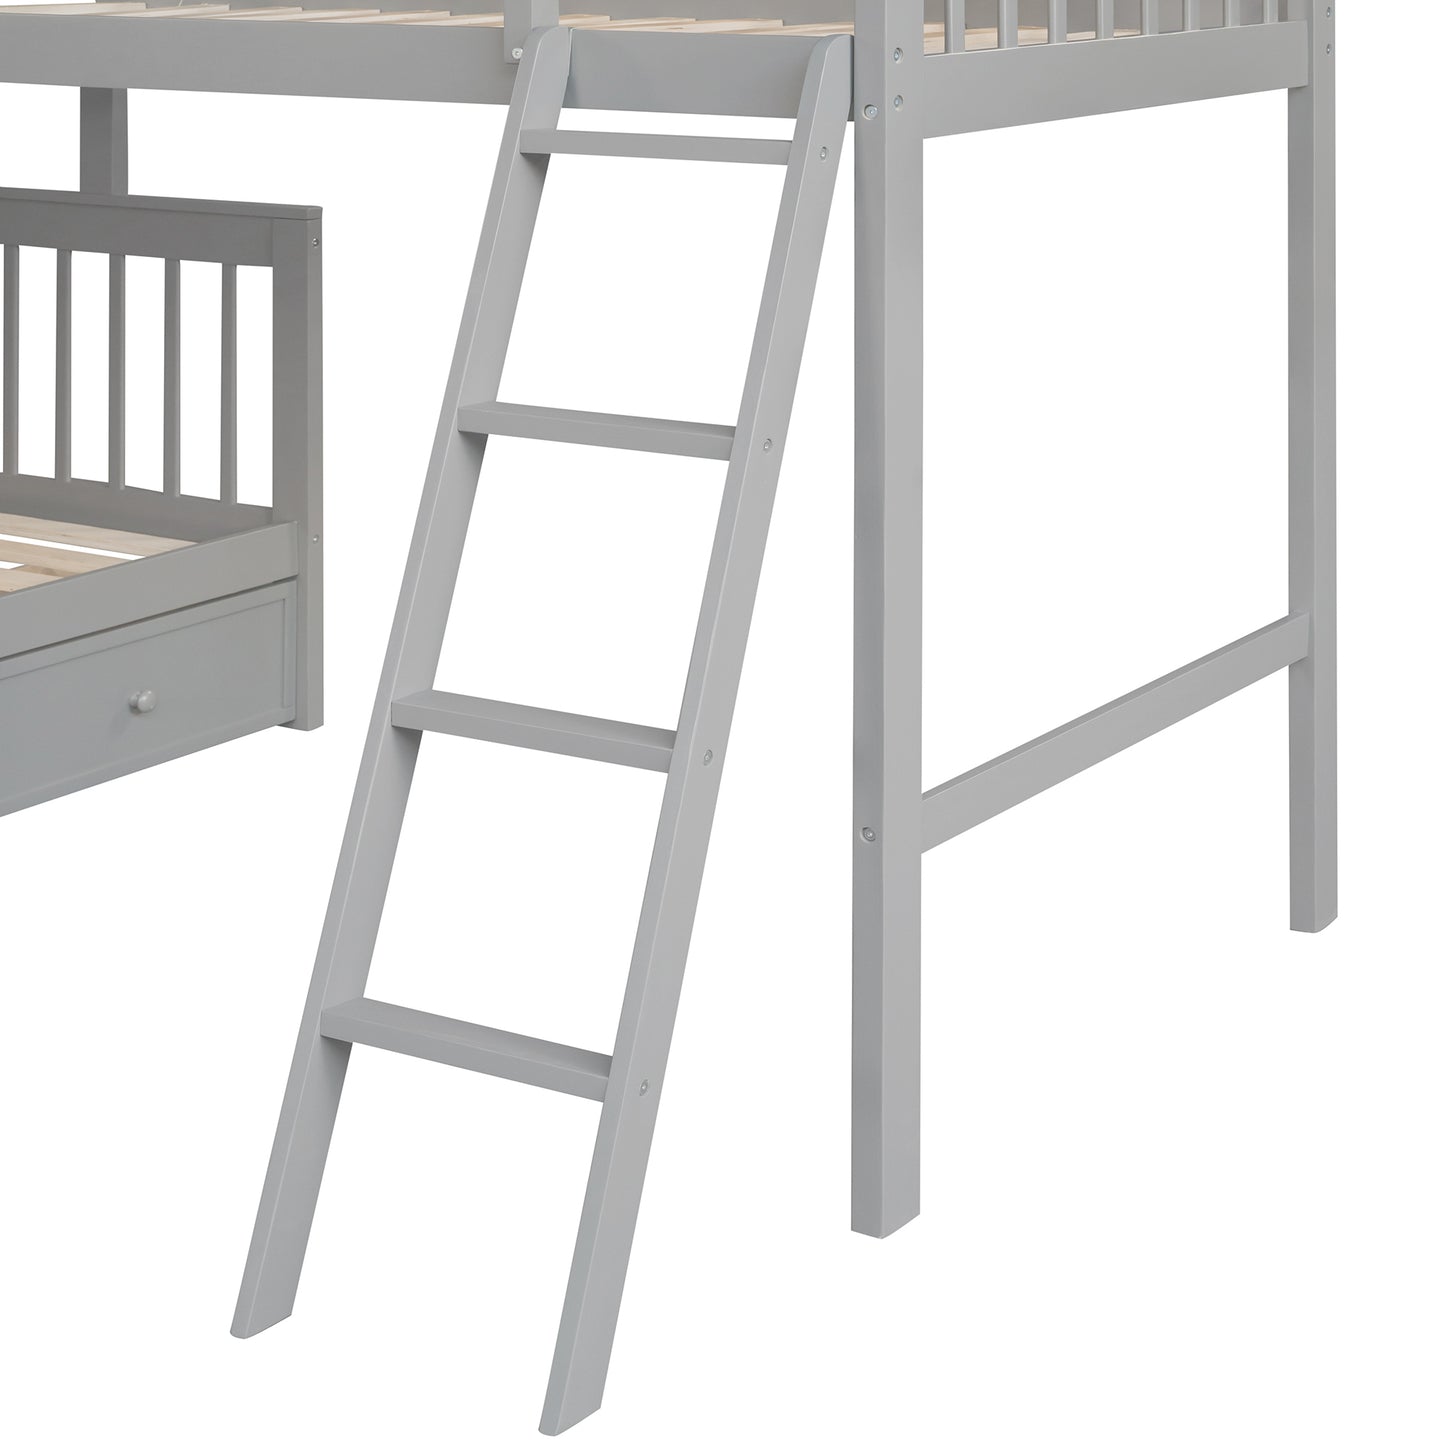 Twin over Full L-Shaped Bunk Bed With 3 Drawers, Ladder and Staircase - Gray